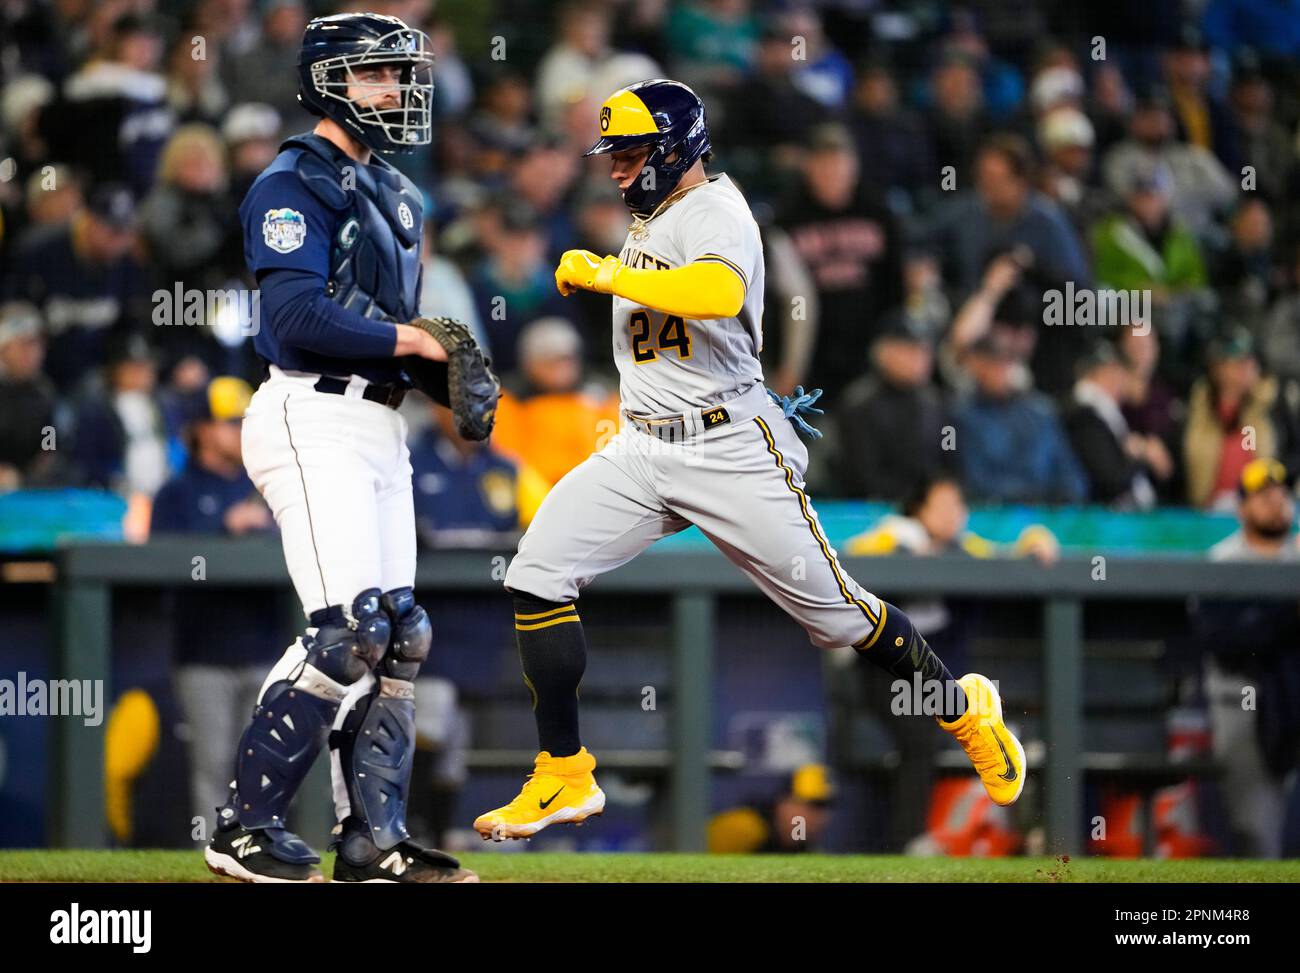 MILWAUKEE, WI - JUNE 08: Milwaukee Brewers catcher William Contreras (24)  bats during an MLB game against the Baltimore Orioles on June 08, 2023 at  American Family Field in Milwaukee, Wisconsin. (Photo by Joe Robbins/Icon  Sportswire) (Icon